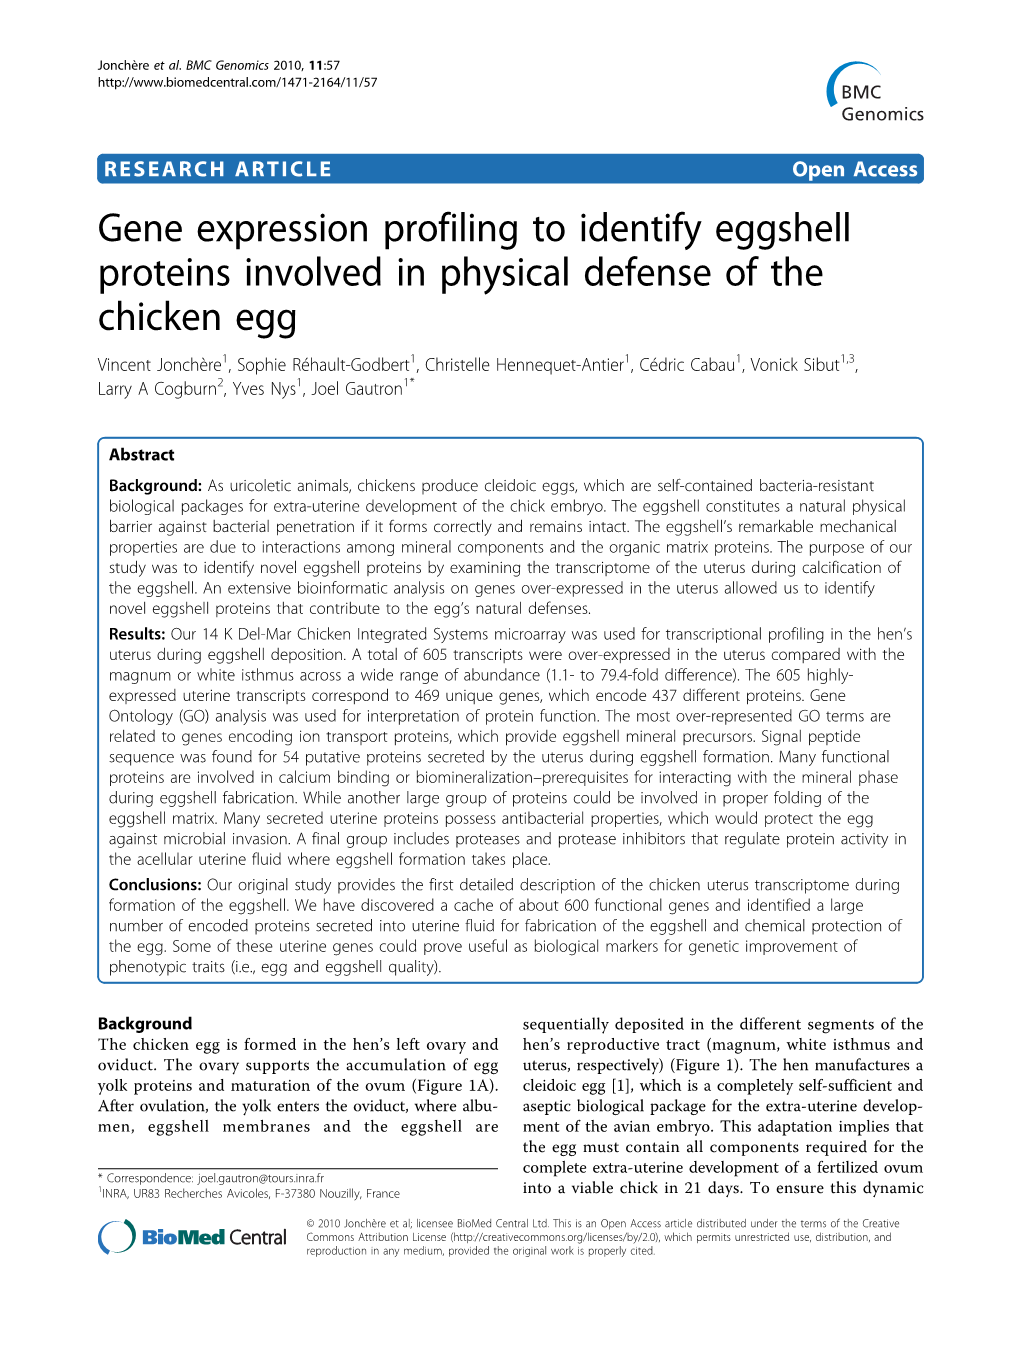 Gene Expression Profiling to Identify Eggshell Proteins Involved In